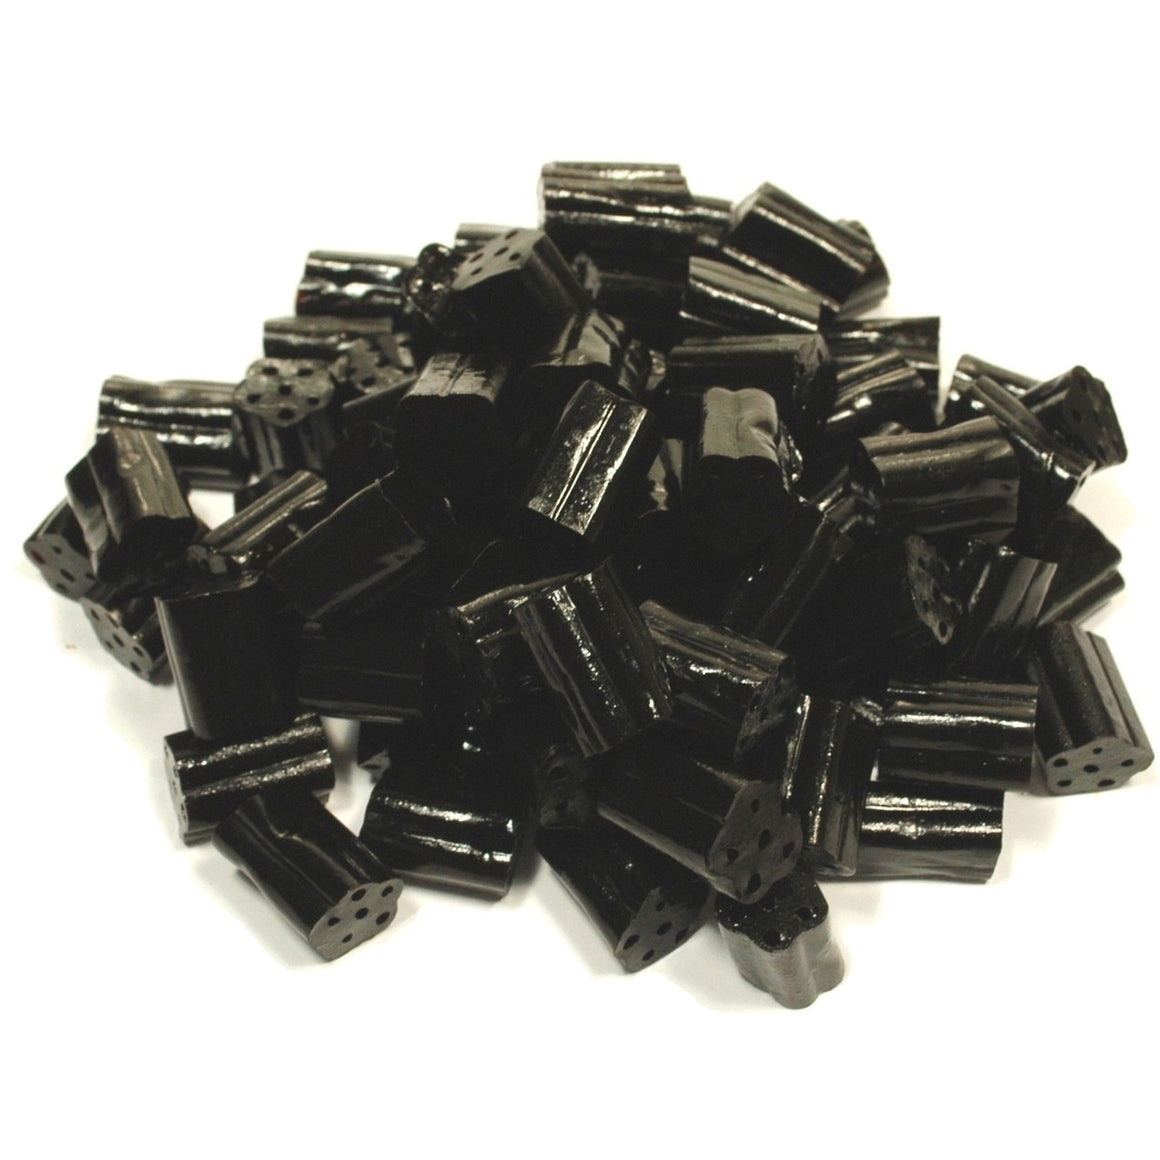 All City Candy Kenny's Black Licorice Bites - 2 lb Bag Kenny's Candy Company For fresh candy and great service, visit www.allcitycandy.com